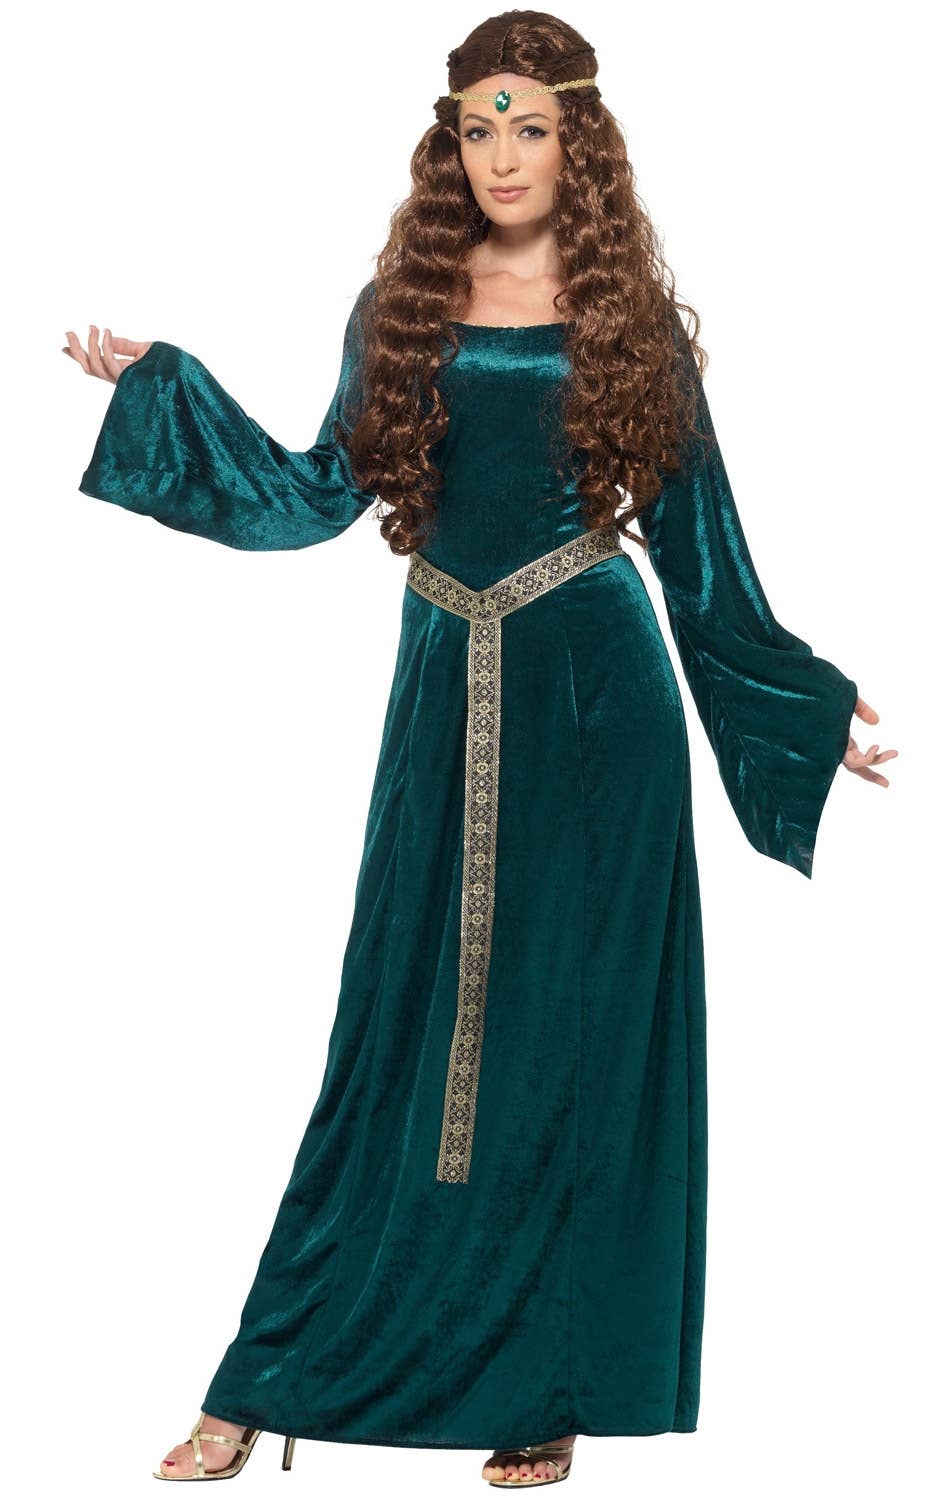 Green Medieval Dress Women's Costume Alternate Front View